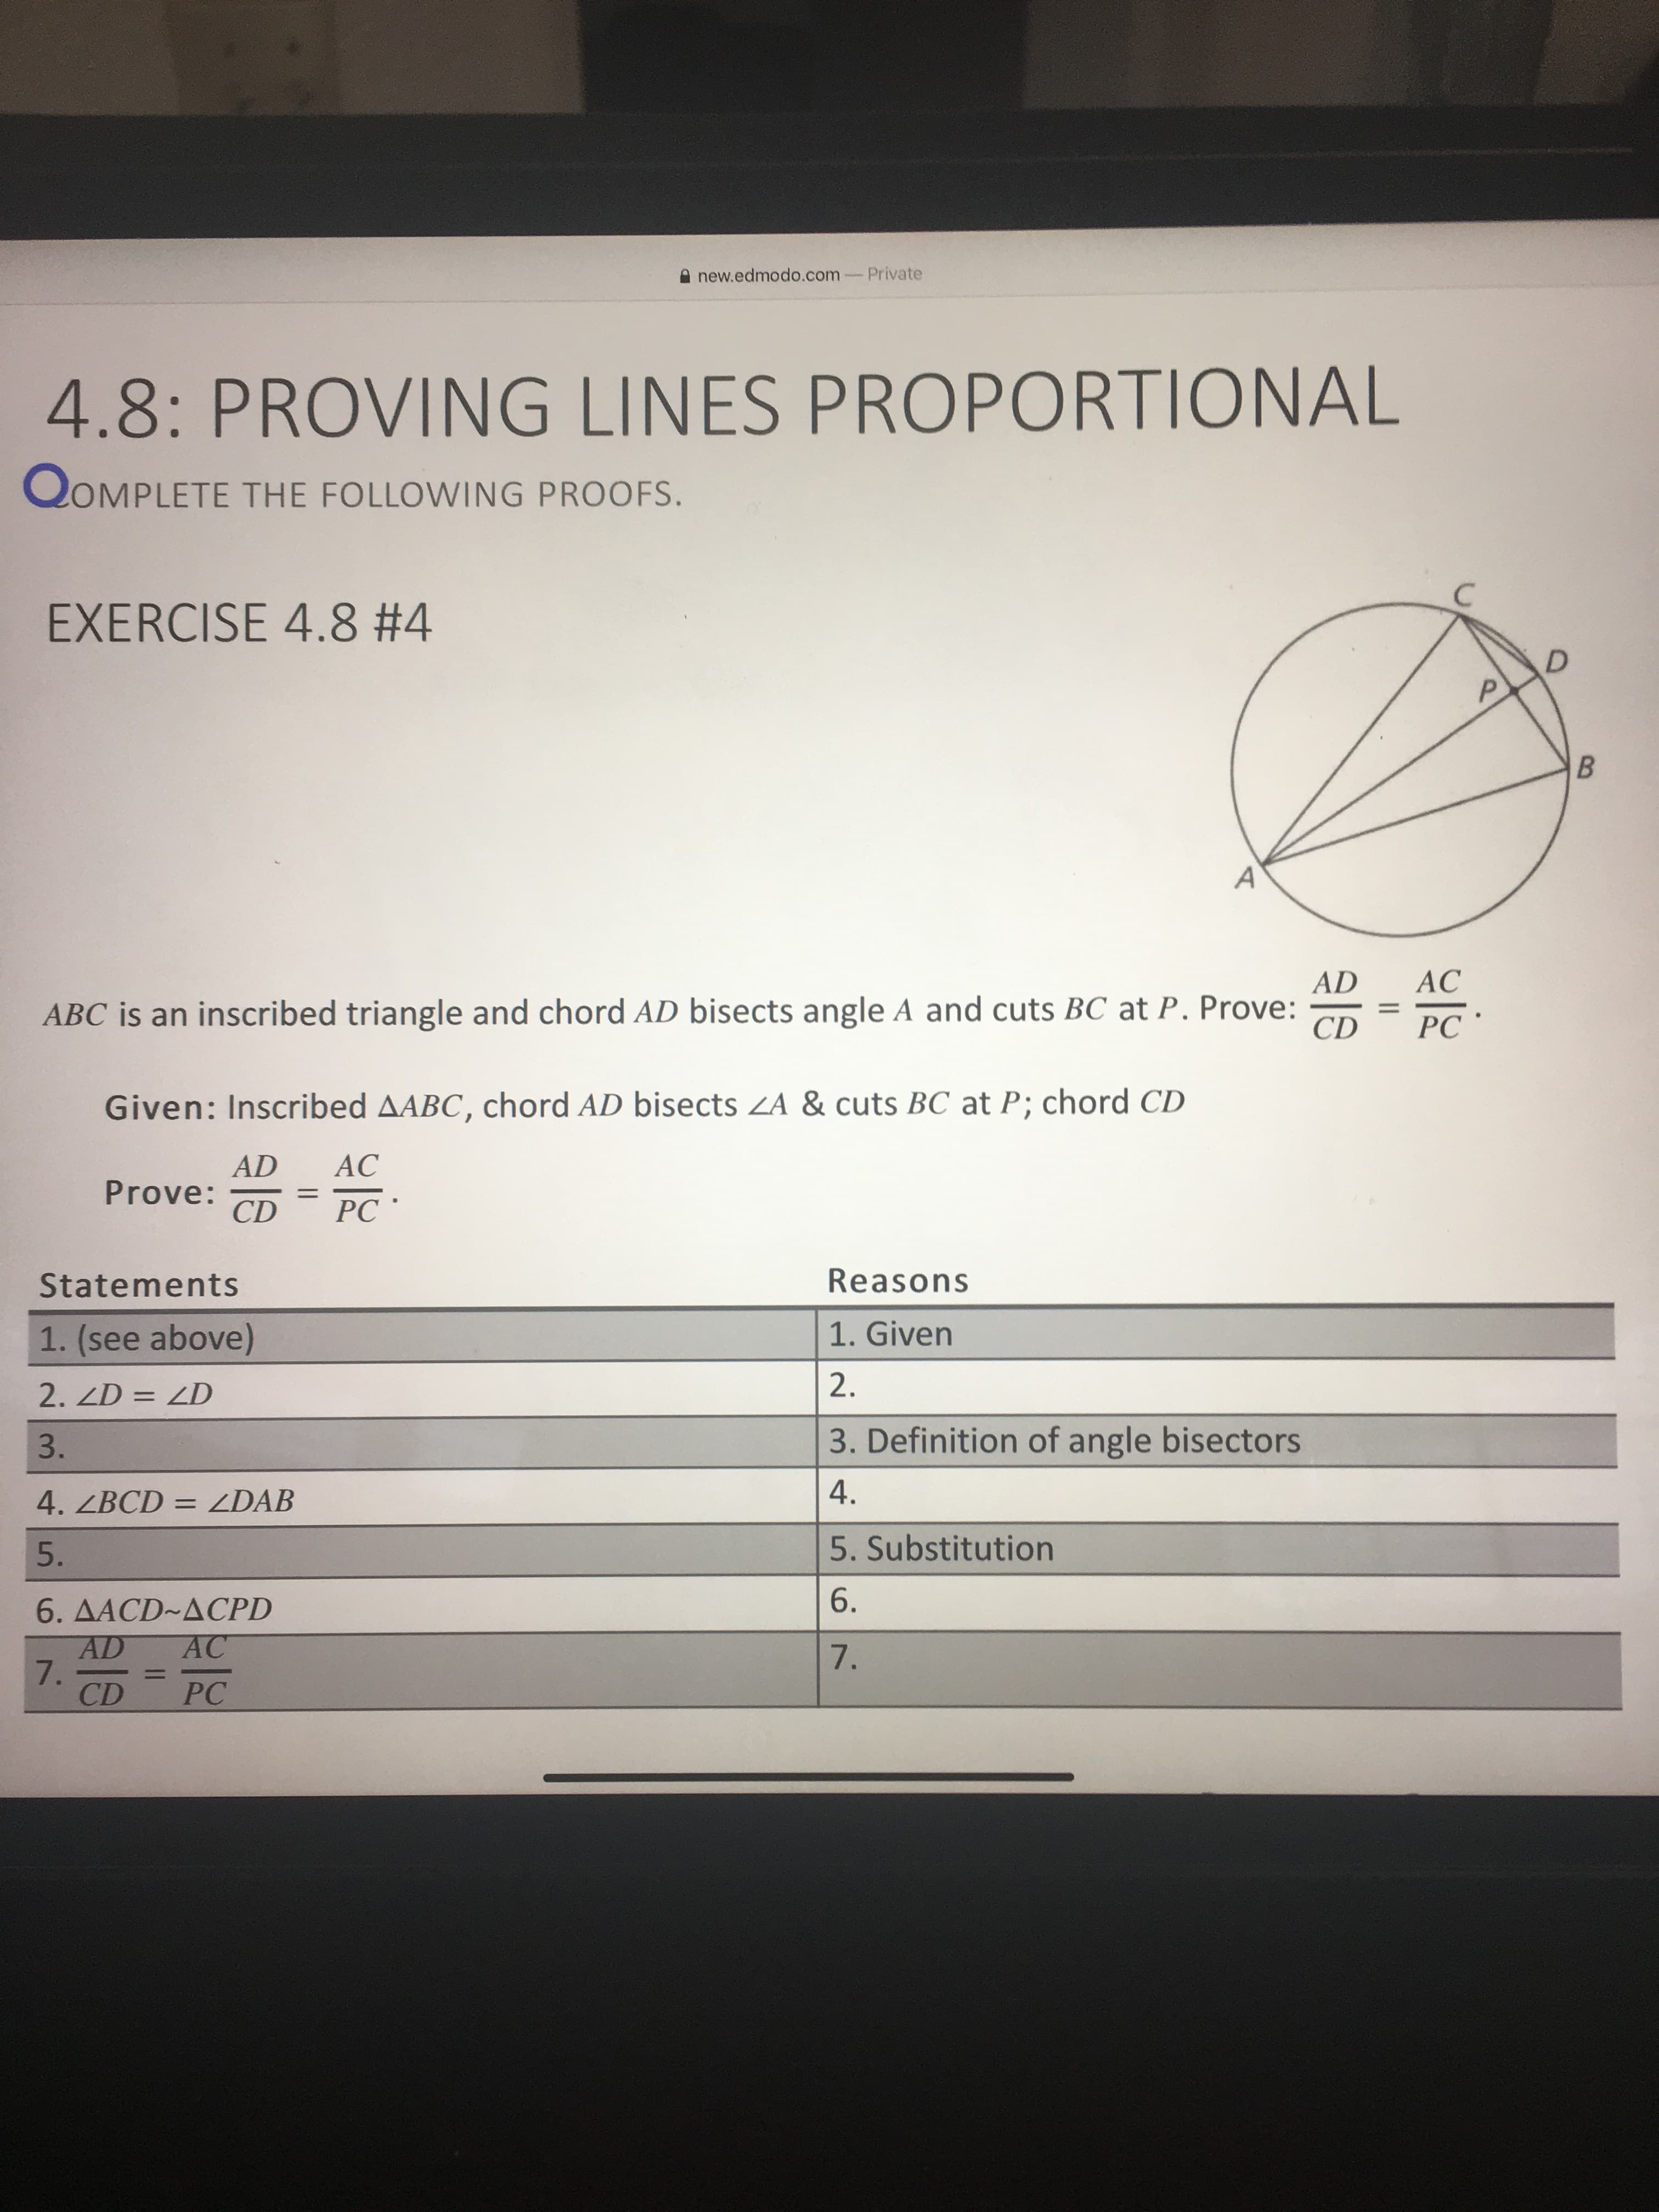 new.edmodo.com-Private
4.8: PROVING LINES PROPORTIONAL
QOMPLETE THE FOLLOWING PROOFS.
EXERCISE 4.8 #4
AD
AC
%3D
CD
PC *
ABC is an inscribed triangle and chord AD bisects angle A and cuts BC at P. Prove:
Given: Inscribed AABC, chord AD bisects ZA & cuts BC at P; chord CD
AD
AC
Prove:
CD
%3D
PC '
Reasons
Statements
1. Given
1. (see above)
2.
2. ZD = ZD
3. Definition of angle bisectors
3.
A.
4. ZBCD = ZDAB
5. Substitution
5.
6.
6. ДАСD~ДСPD
AD
7.
CD
AC
7.
%3D
PC
